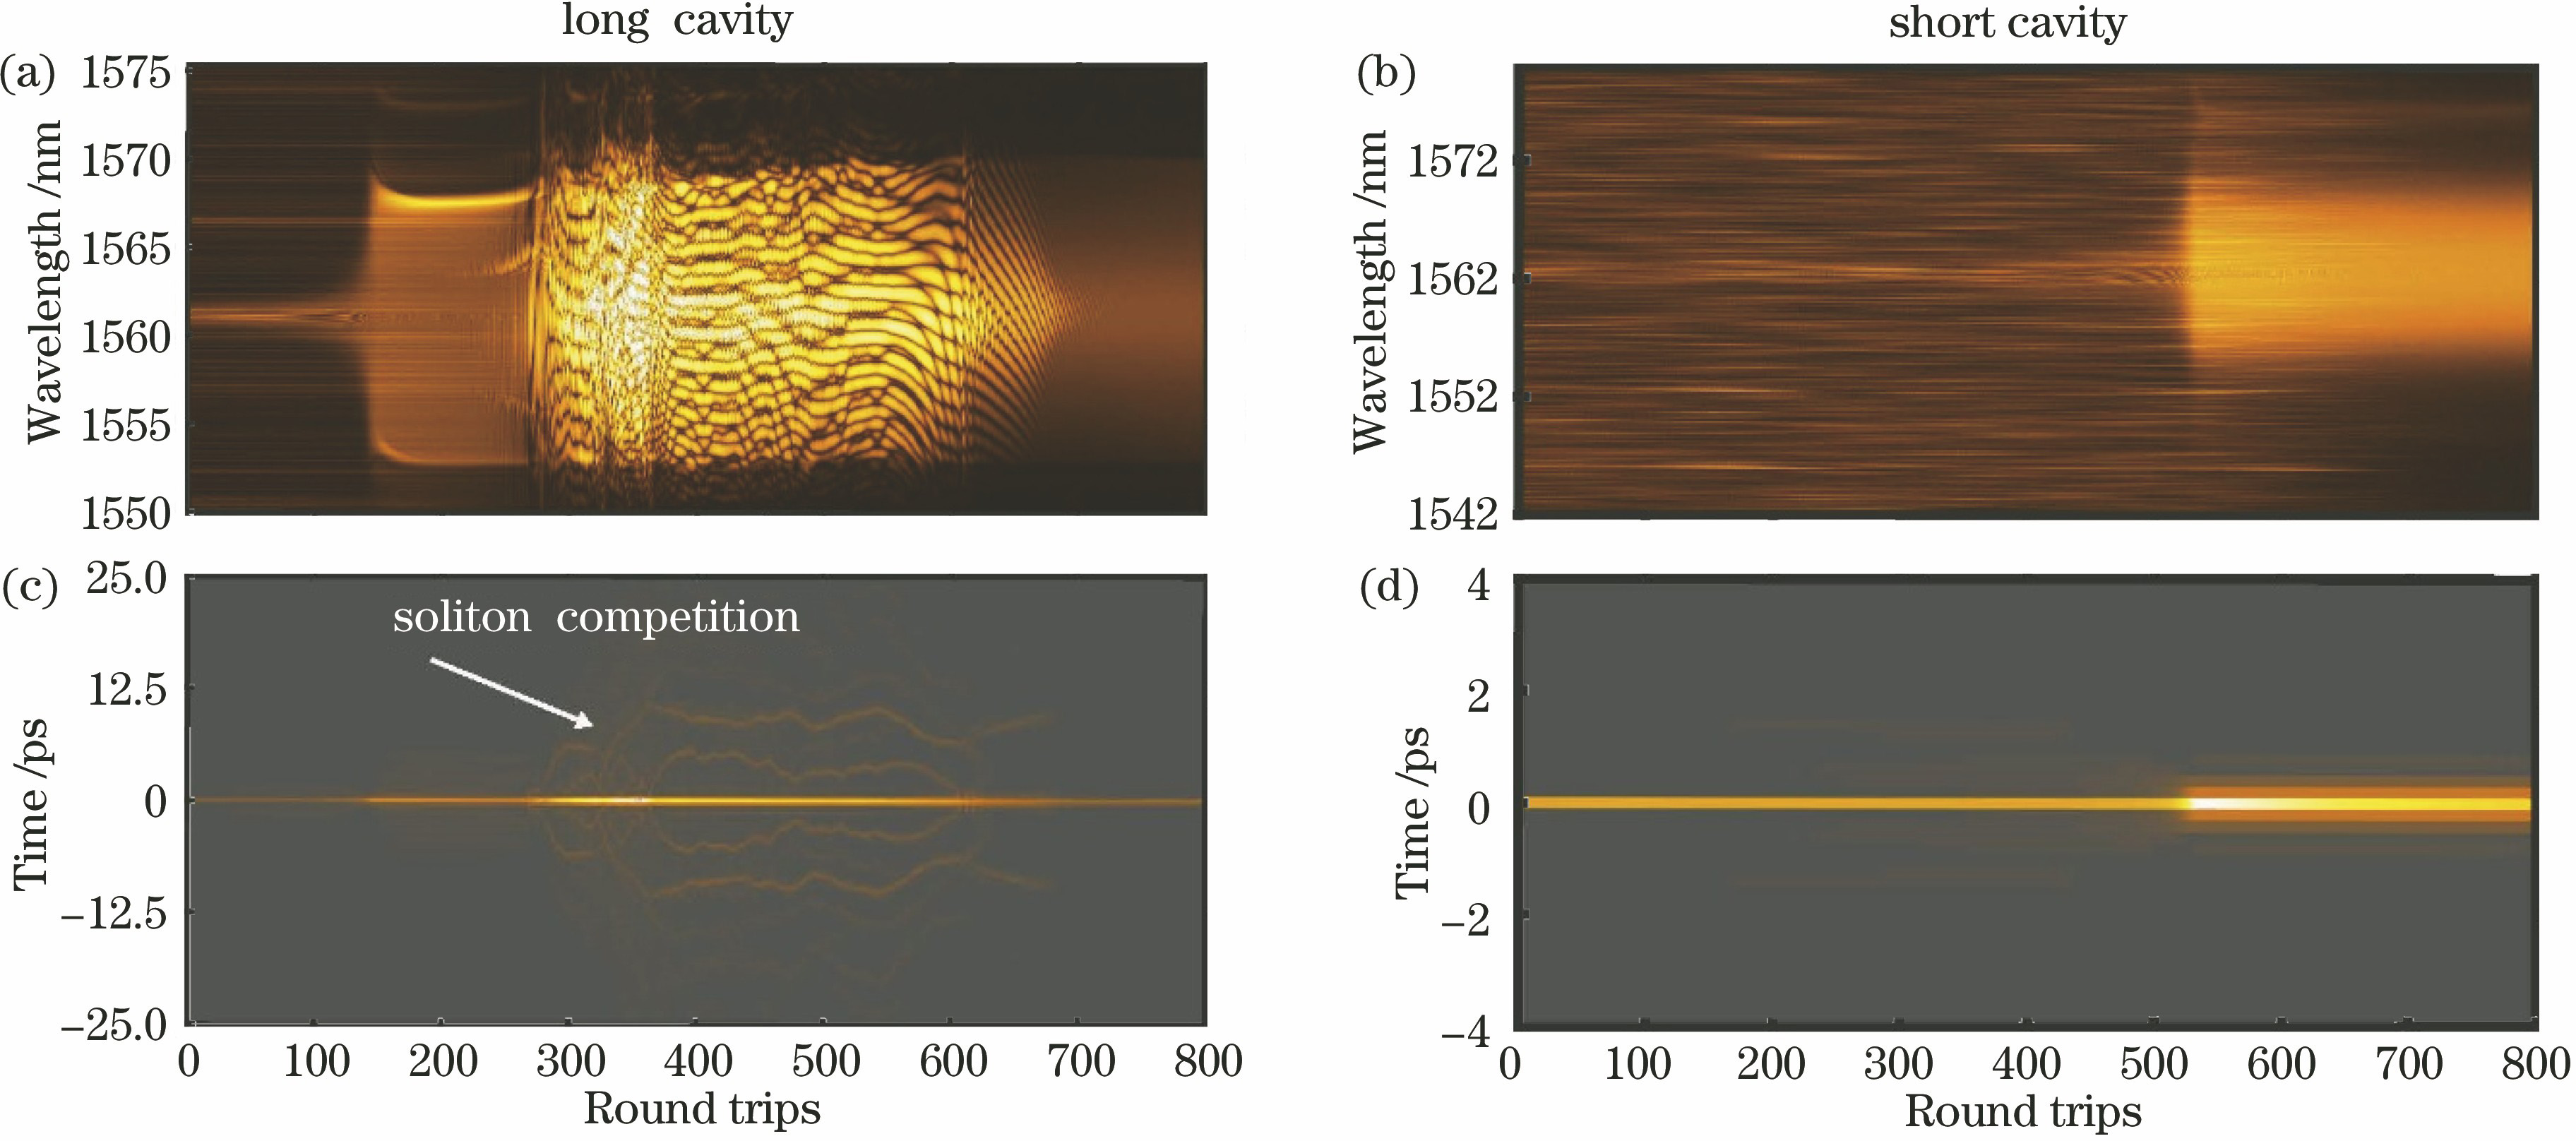 Build-up of dissipative solitons for long cavity (16 m) and short cavity (10 m). (a)(b) Spectral evolution during dissipative soliton build-up measured by DFT; (c)(d) field autocorrelation obtained by Fourier transform for spectra